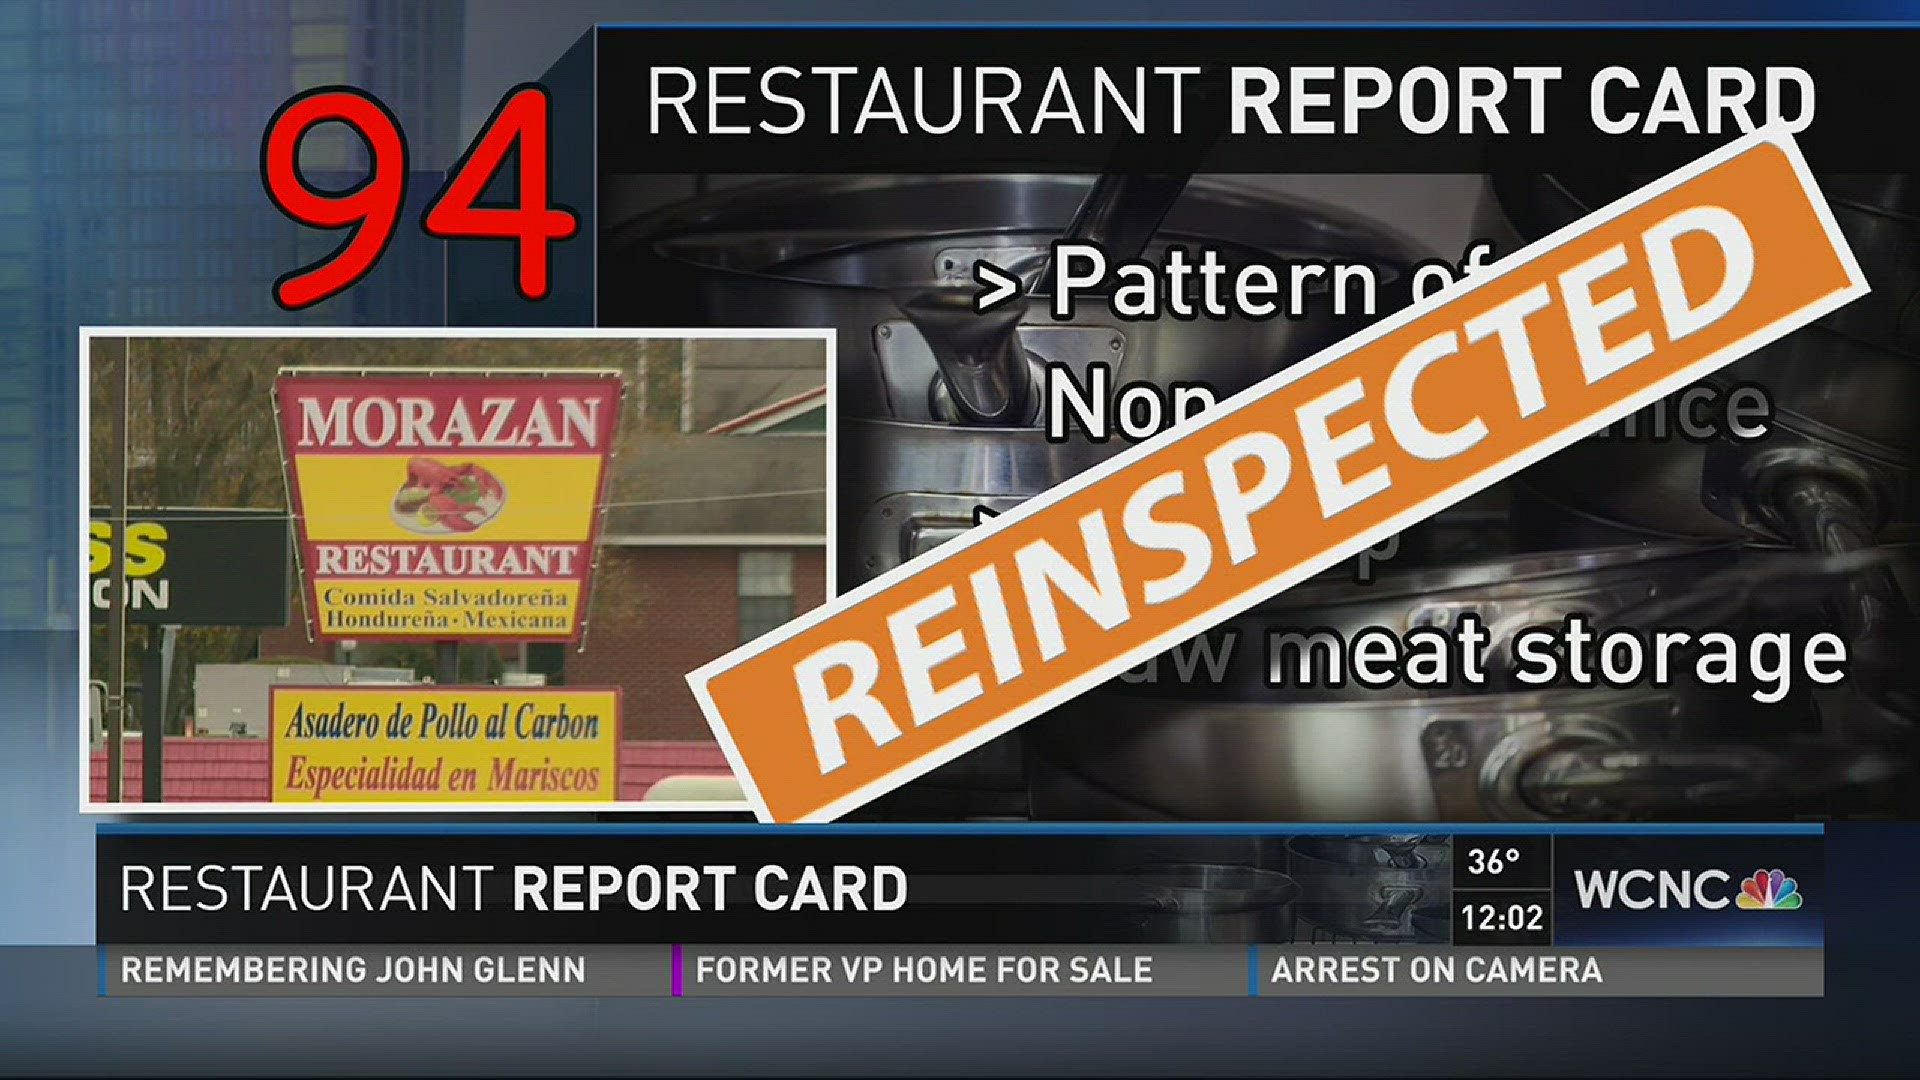 Every week -- NBC Charlotte's Bill McGinty takes a look at which local restaurants are making the grade when it comes to health inspections